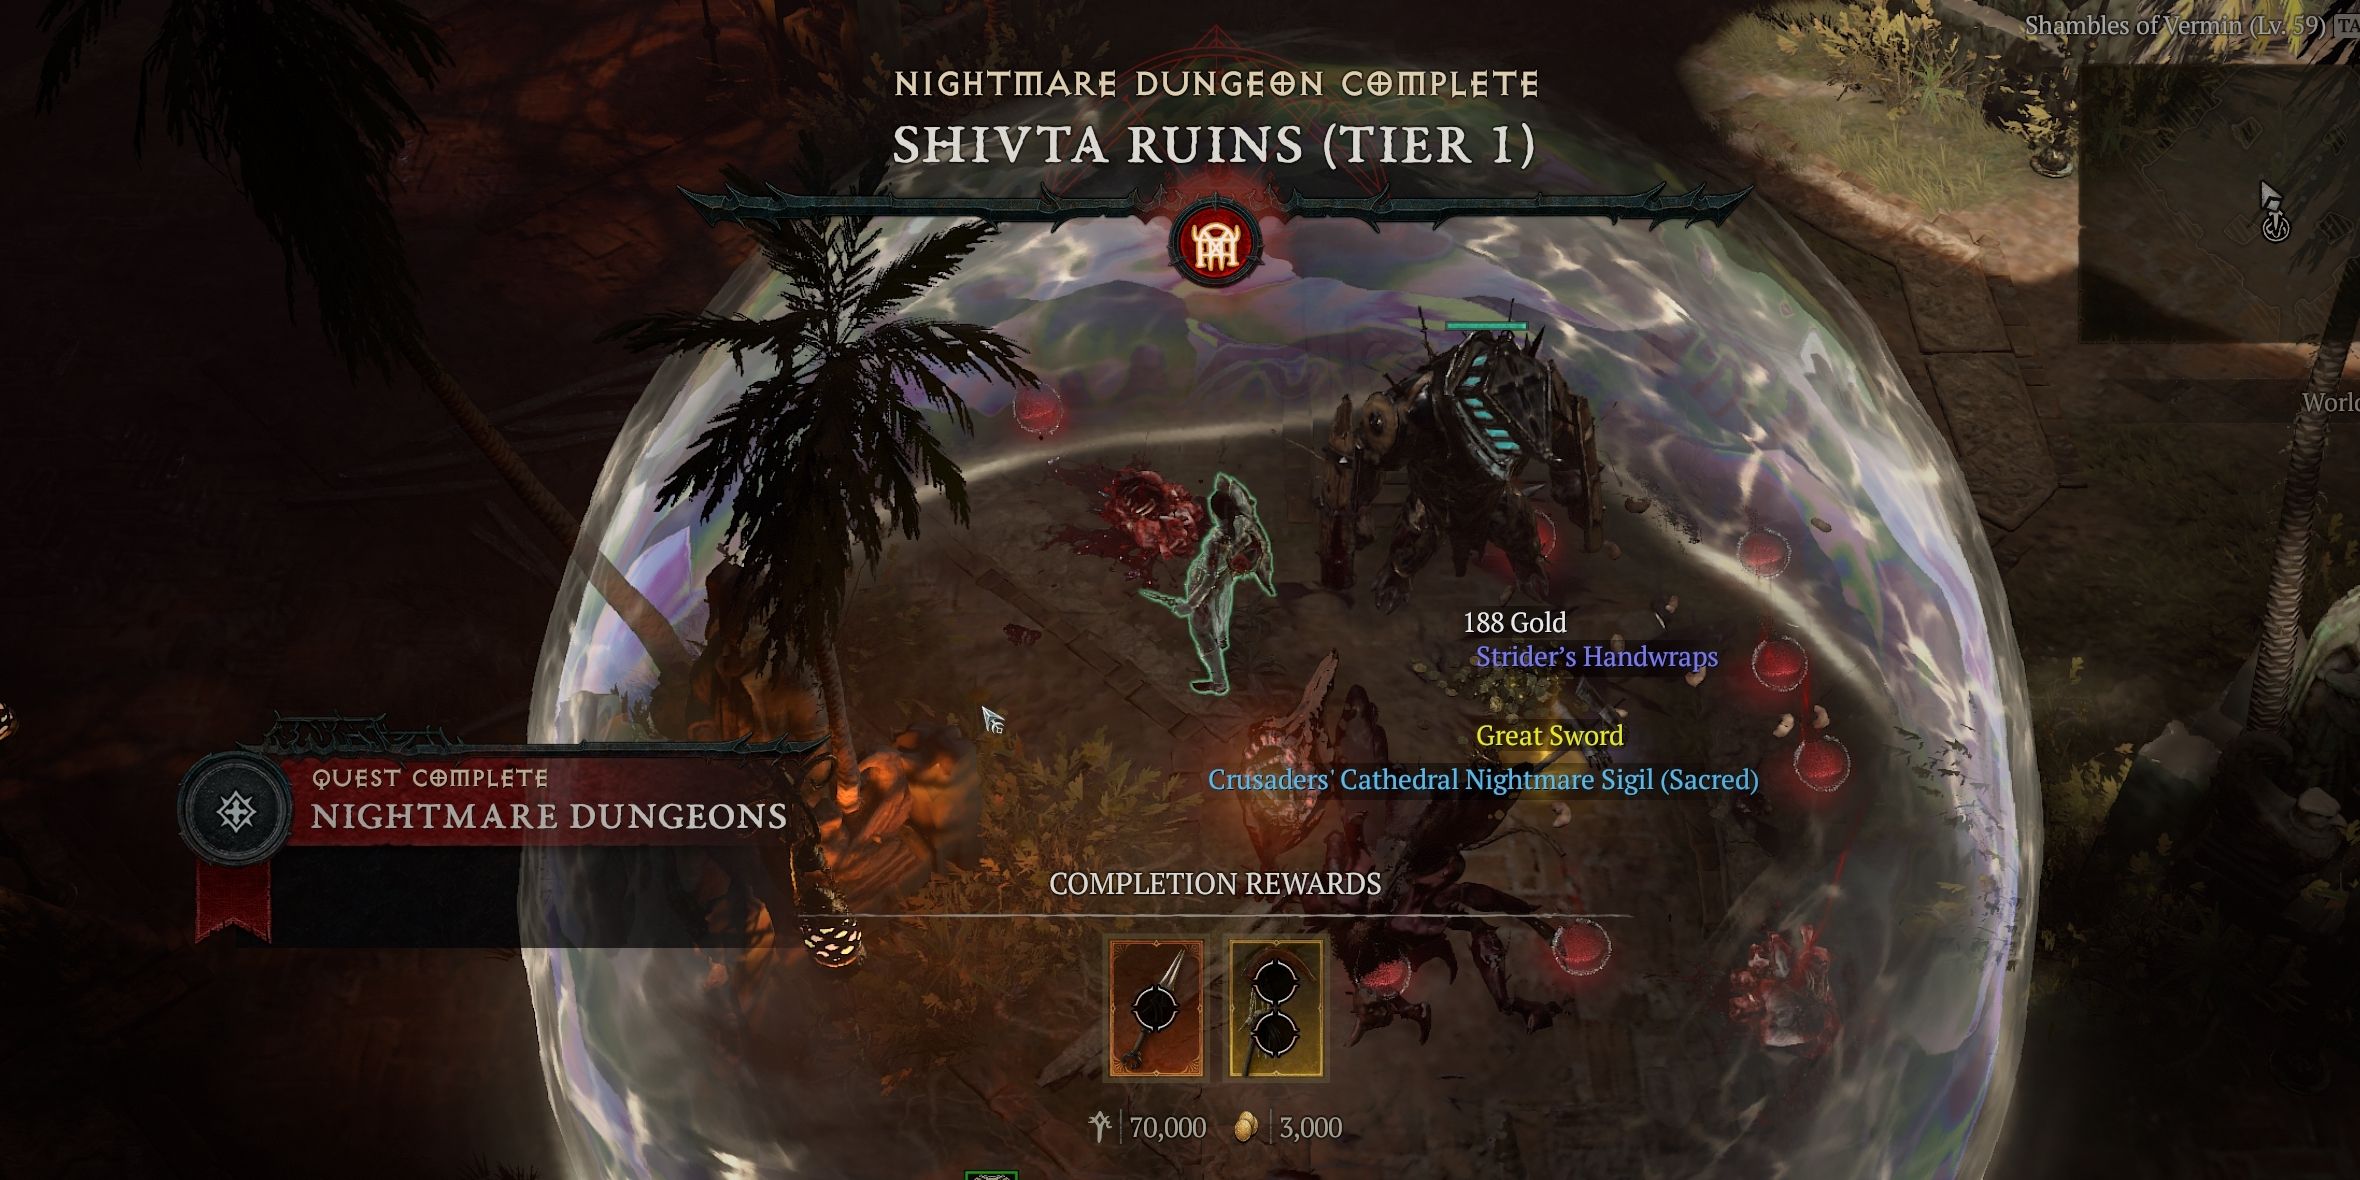 A screenshot of the completion screen of a Nightmare Dungeon in Diablo 4